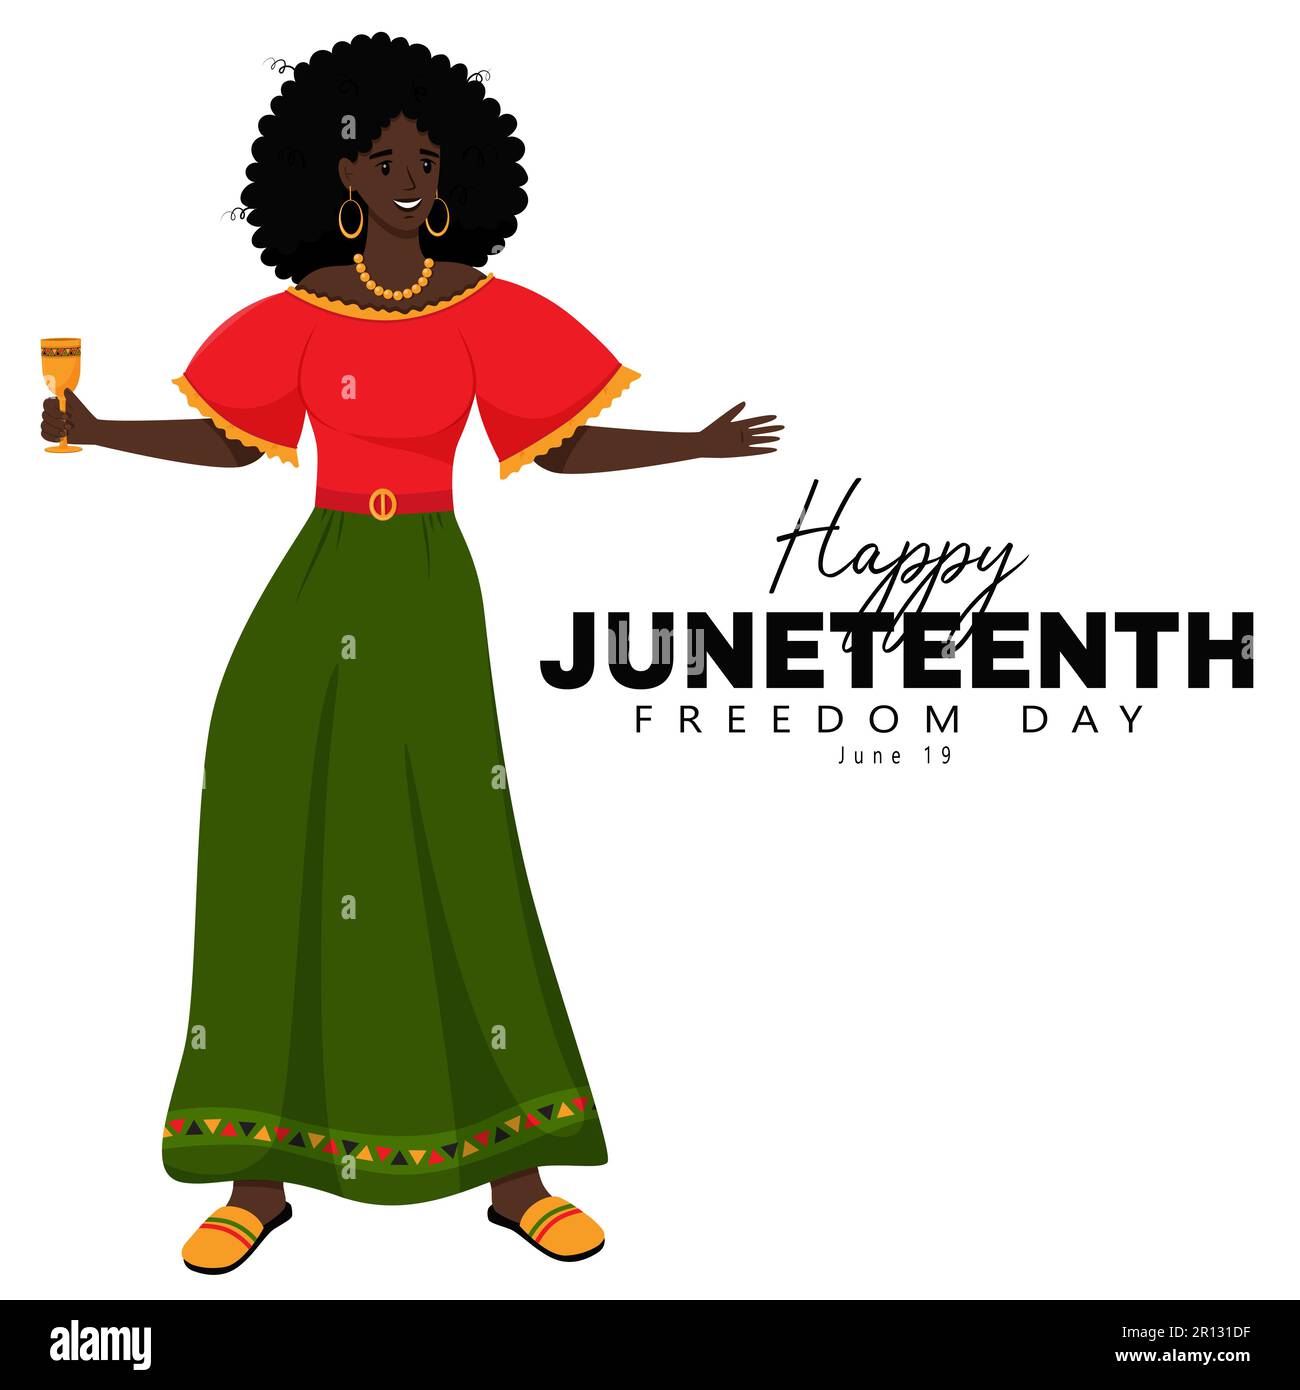 Happy Juneteenth. A Cute Dark-Skinned Woman With Black Curly Hair In A Dress Holds A Wine Glass In Her Hand. African-American Freedom Day. Flat Vector Stock Vector